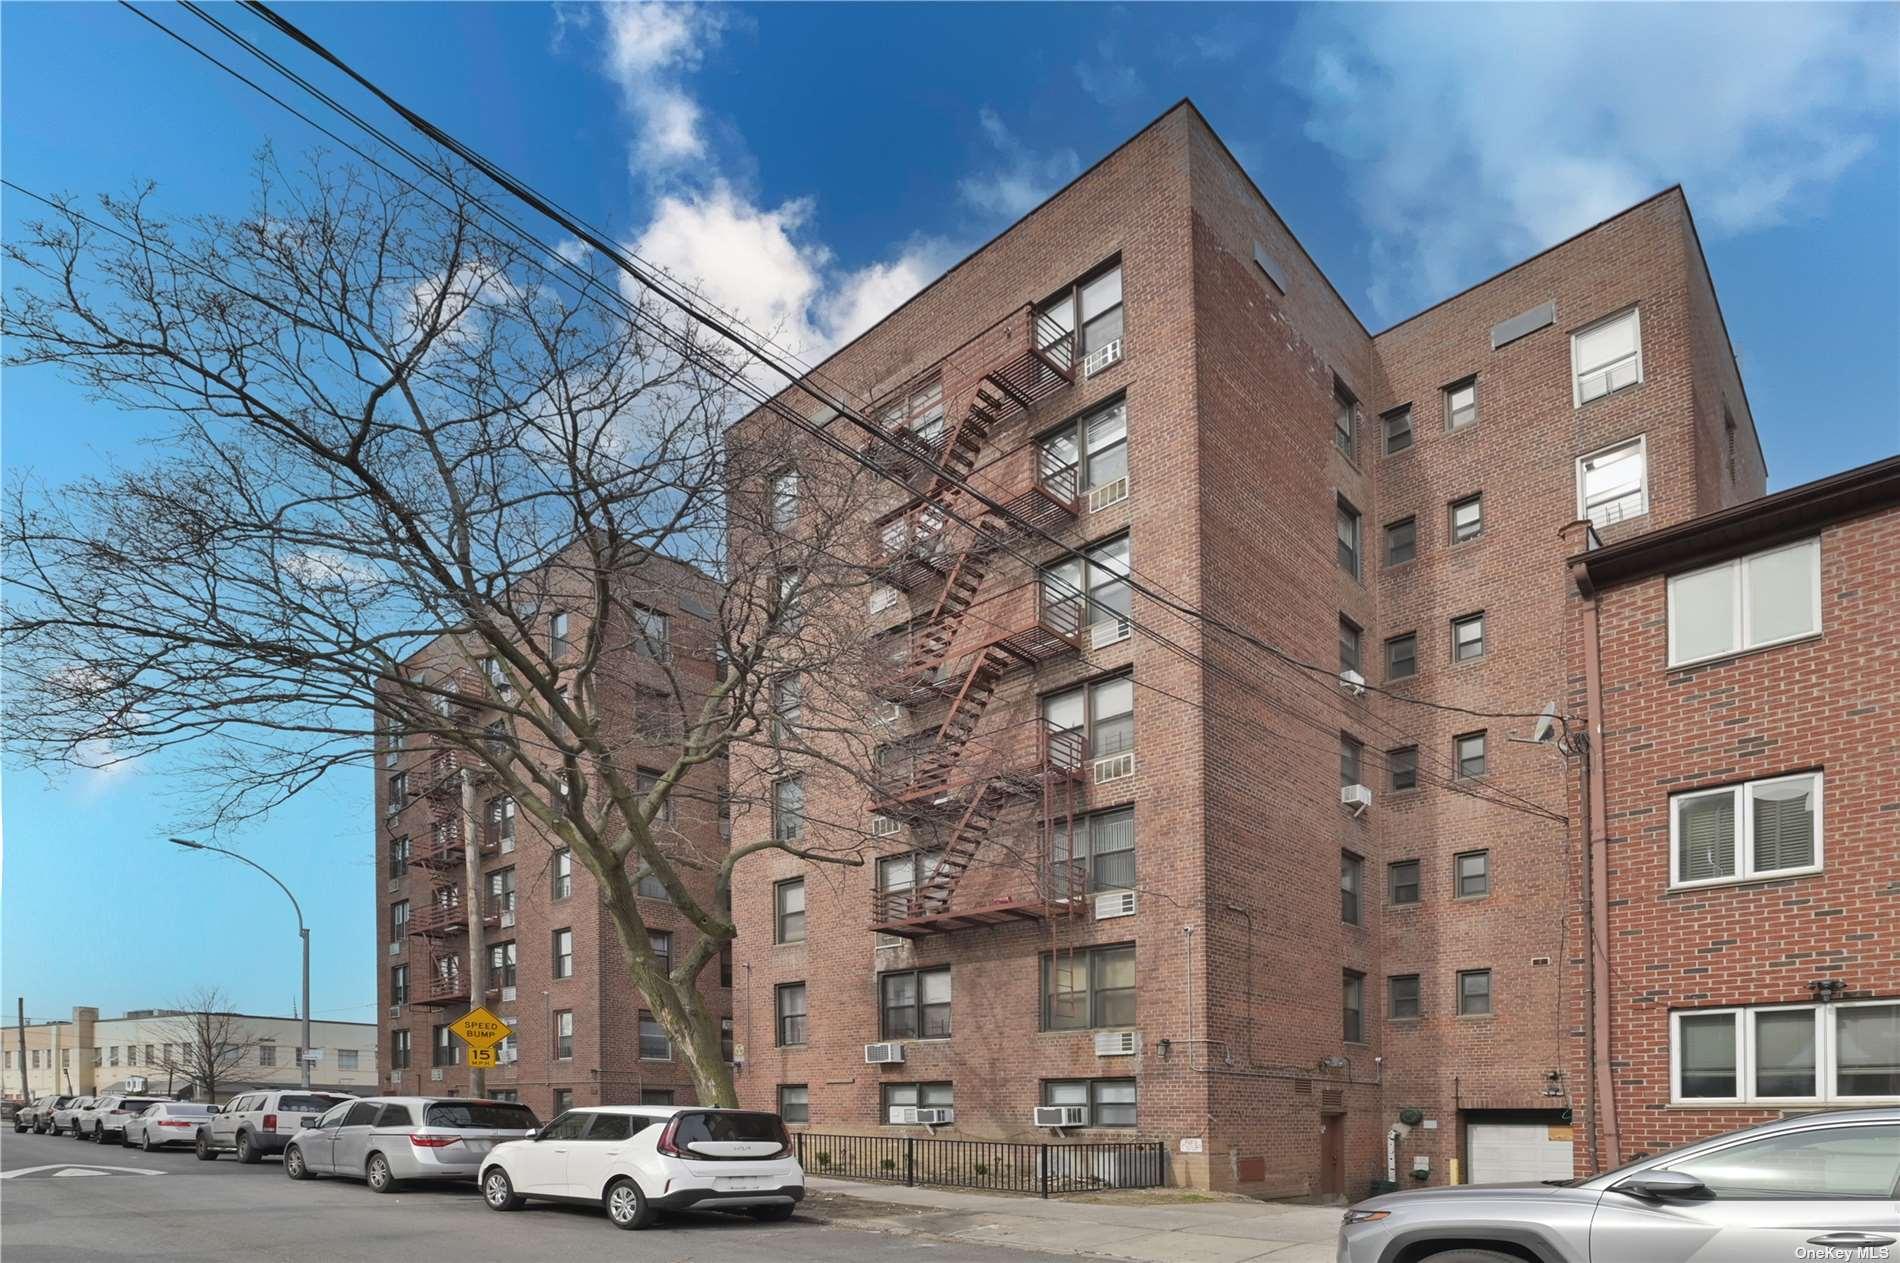 97-11 63 Drive #E7 in Queens, Rego Park, NY 11374